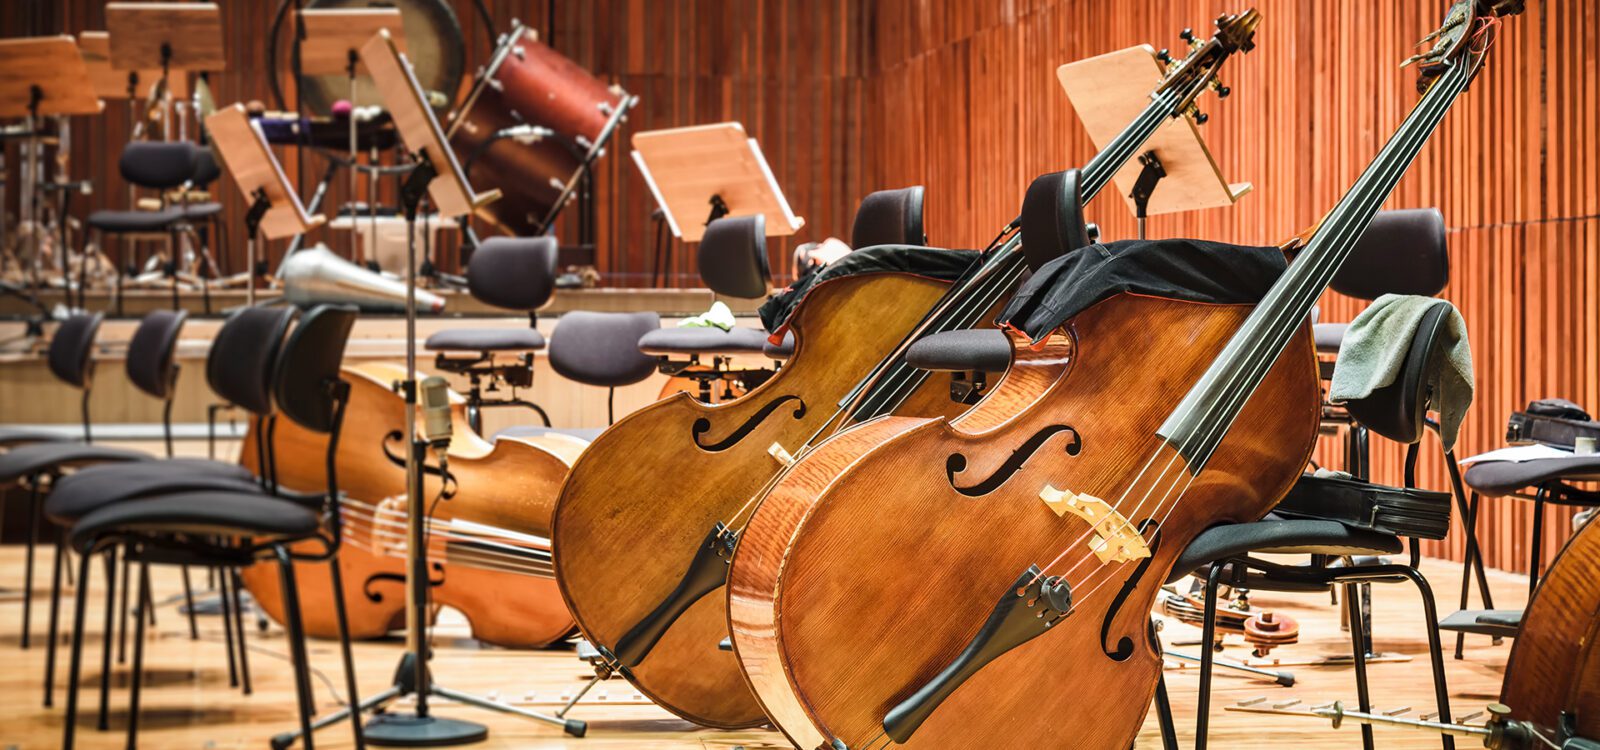 Cello Music instruments on a stage